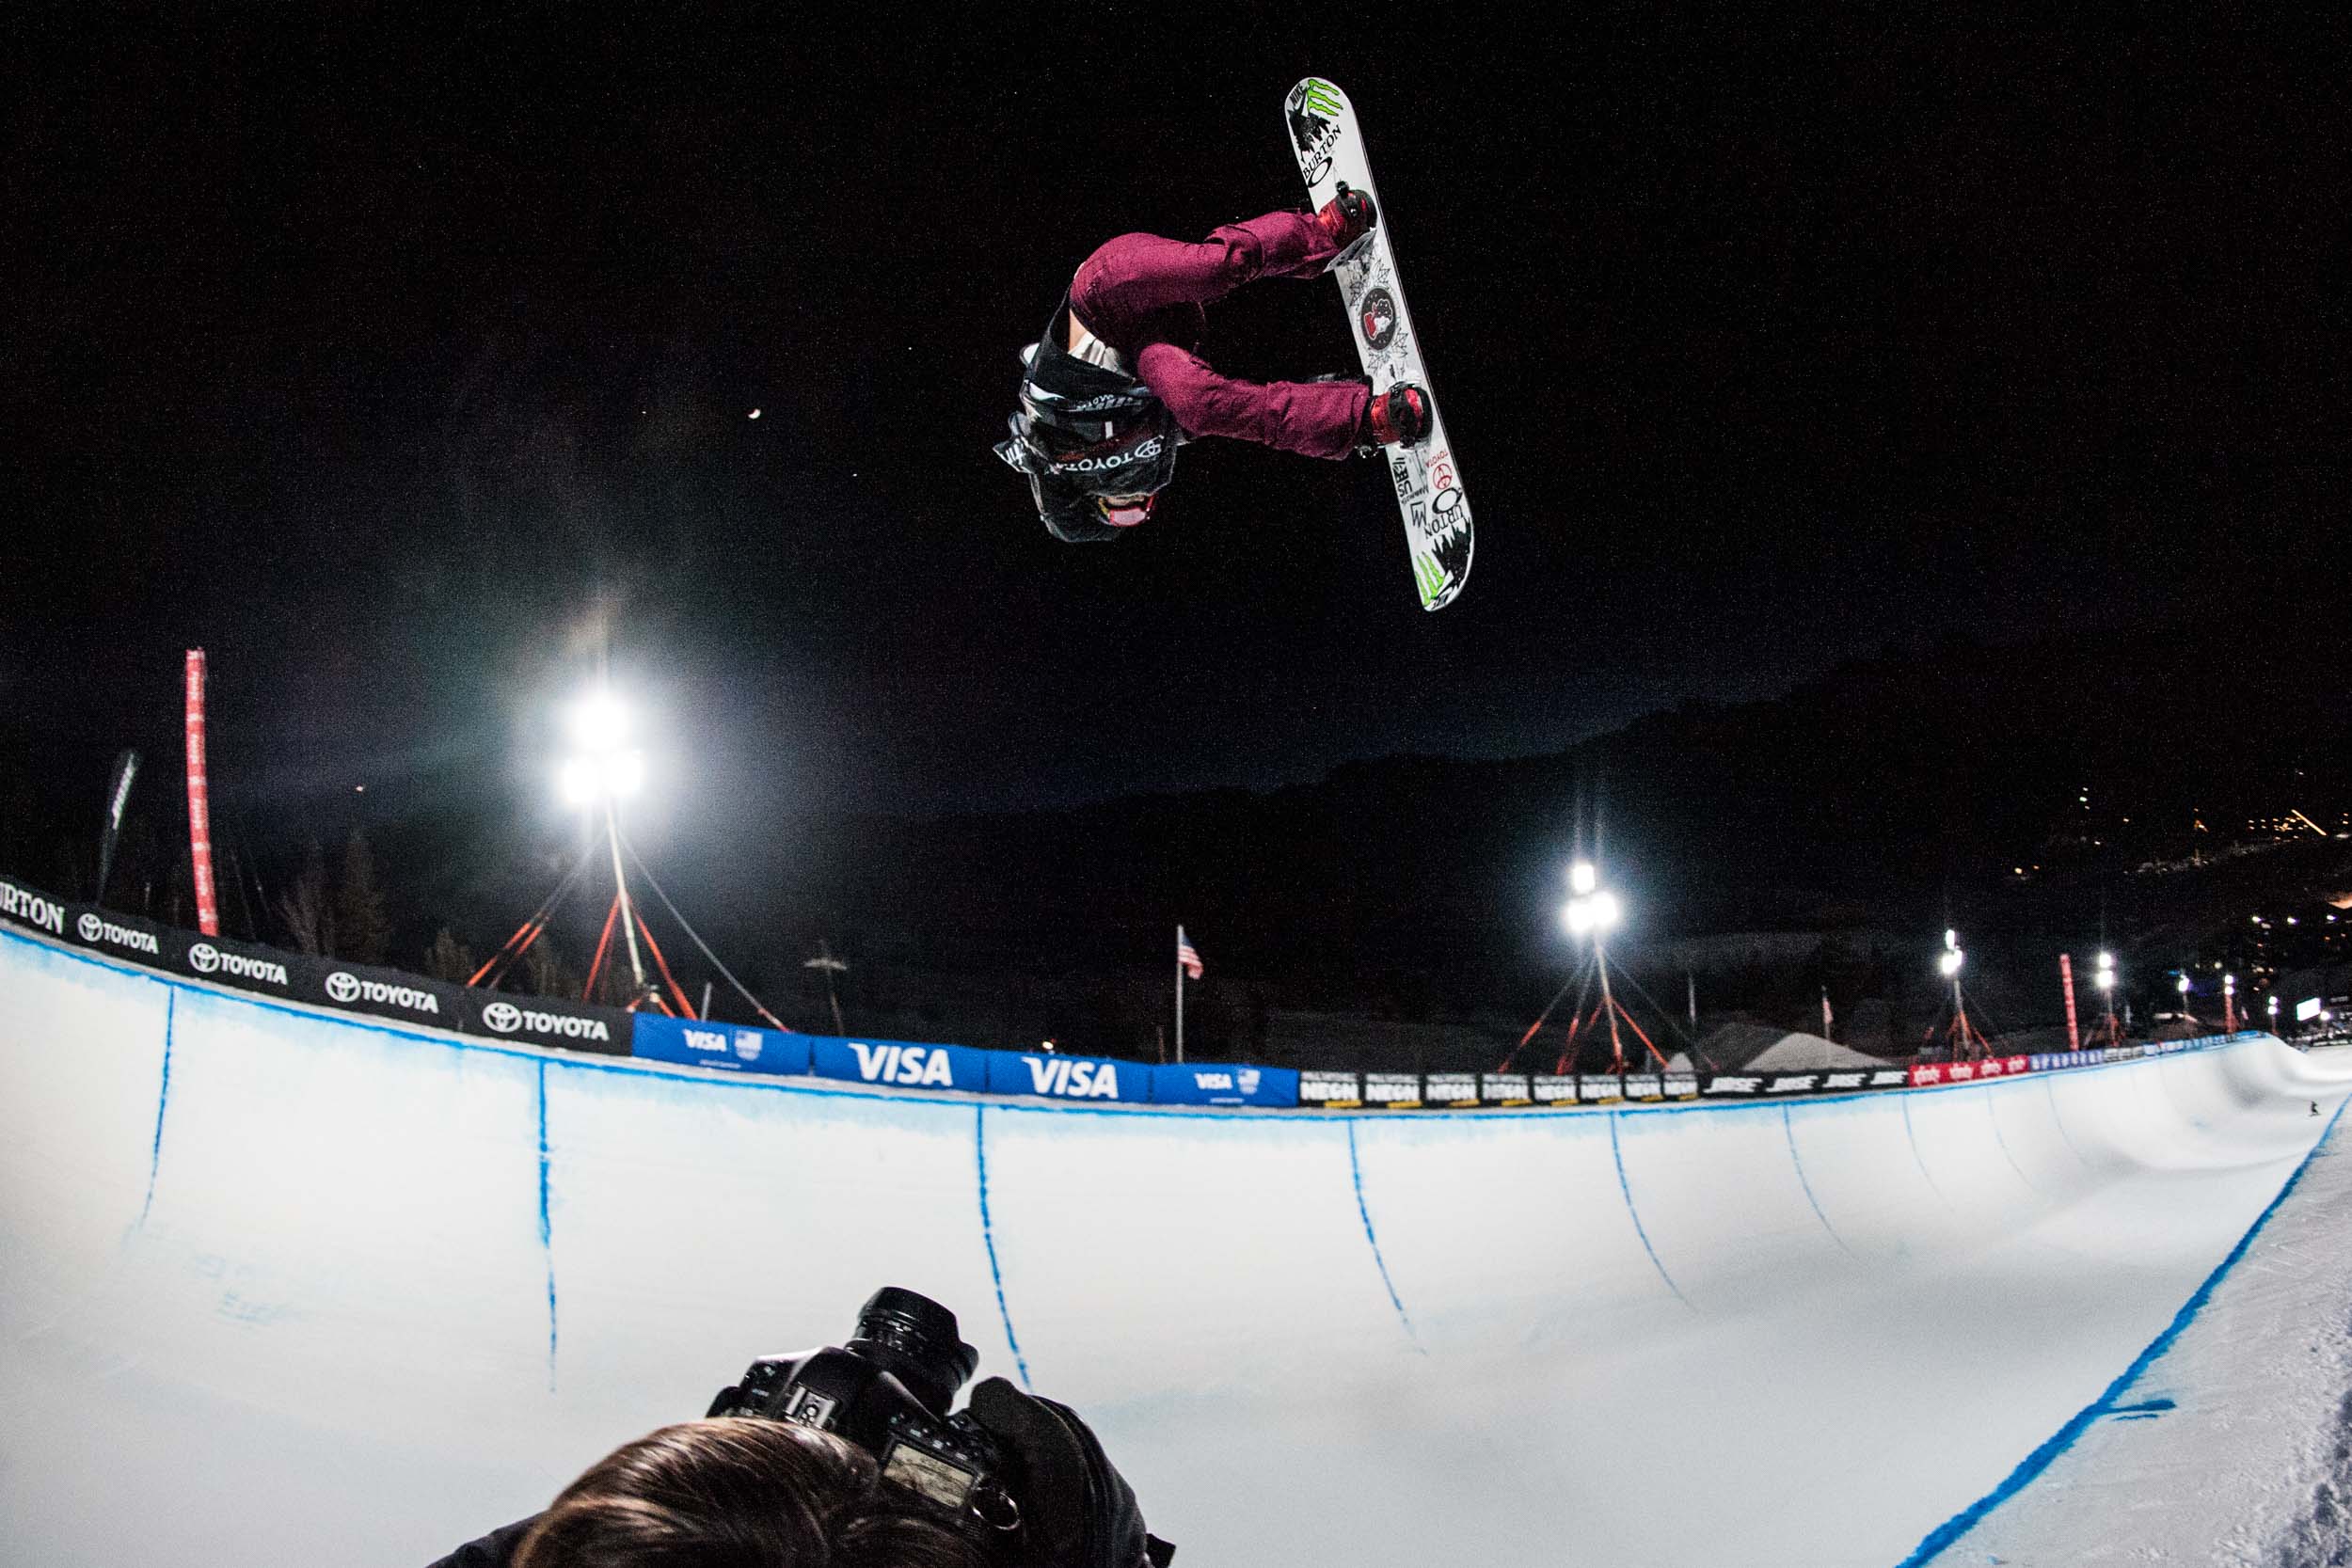 Monster Energy’s Chloe Kim Takes Second in Women’s Halfpipe At Mammoth Grand Prix